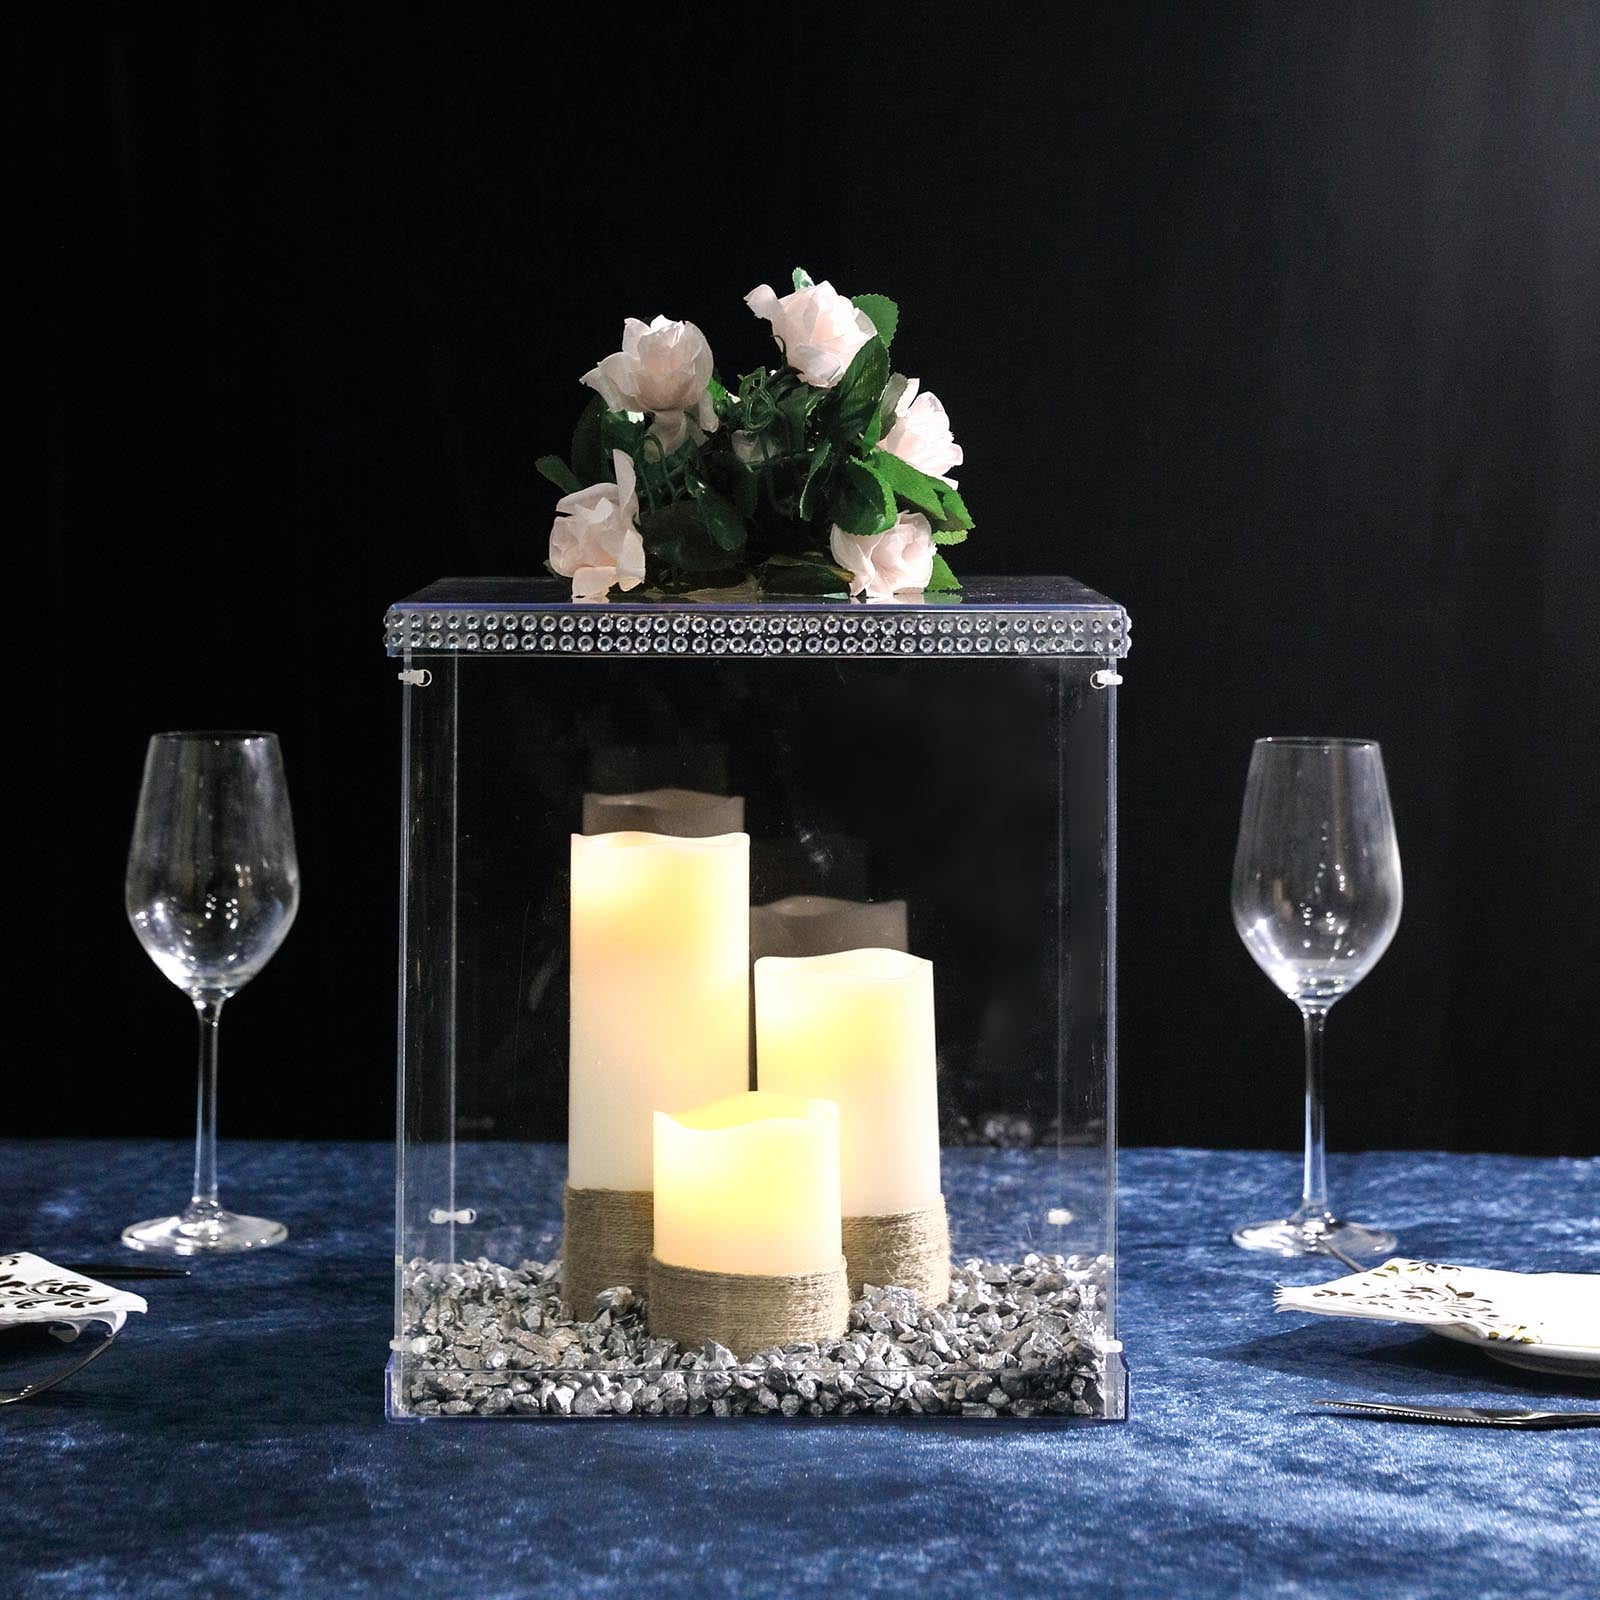 Decorations for popular wedding trends with Villeroy & Boch